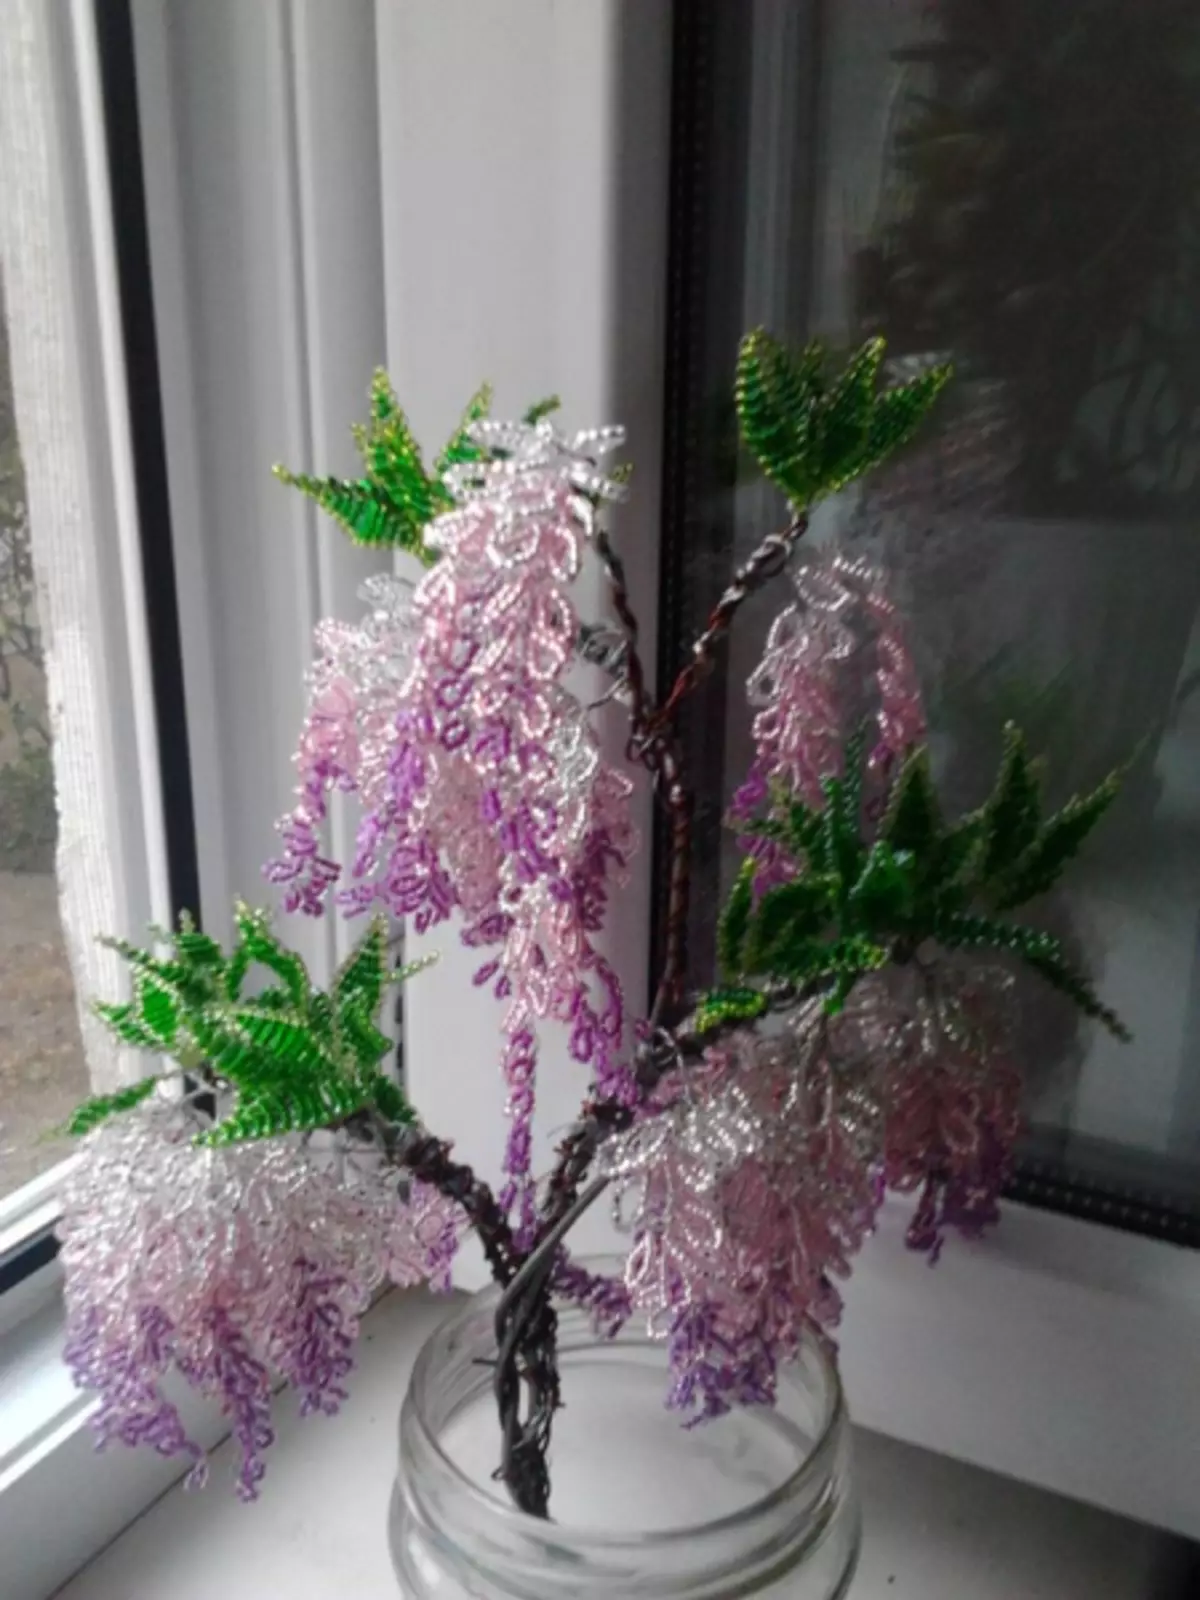 Master class on bead trees: photo and video on weaving wisteria and pearl wood